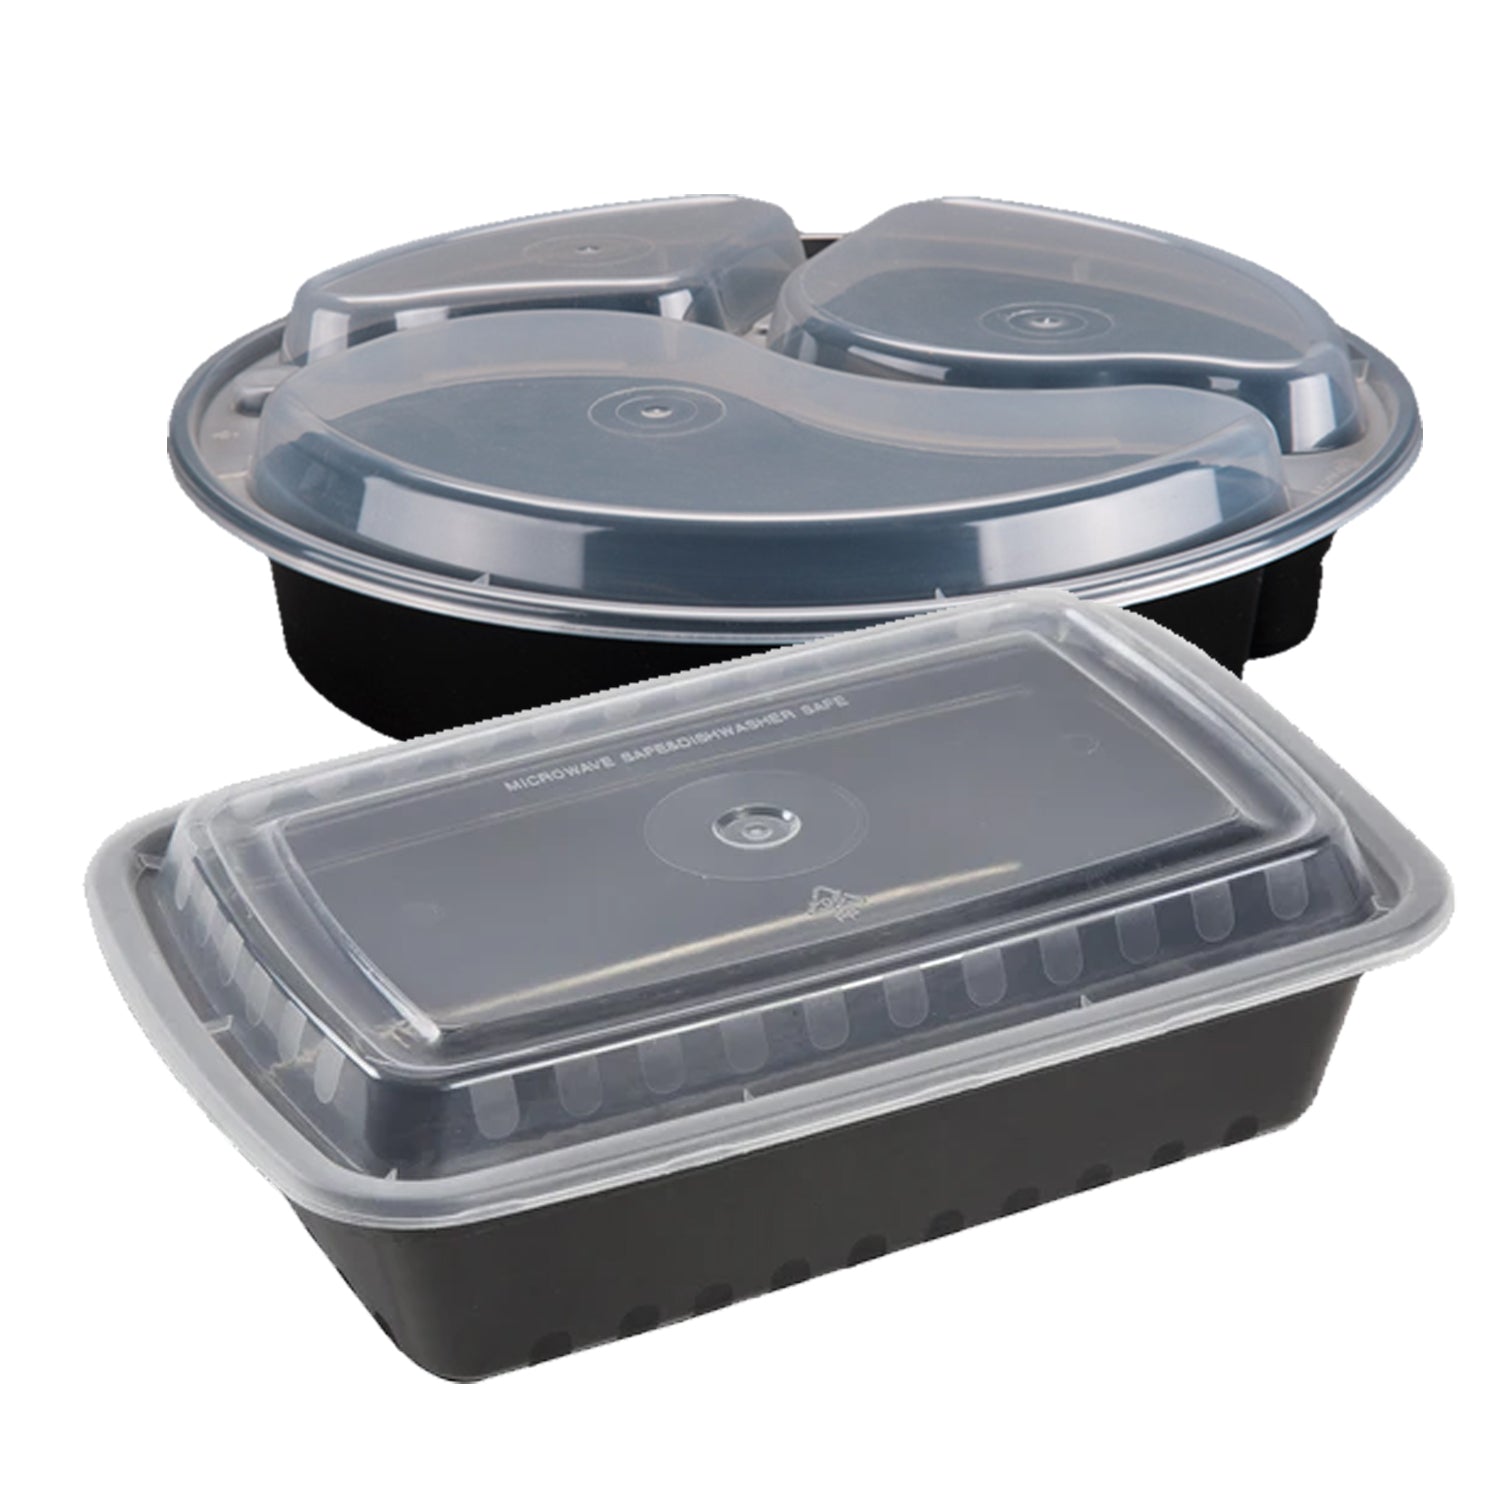 Vezee Eco Friendly Microwavable , Mineral Filled Recyclable Biodegradable 9x6 Take Out Food Containers with Clamshell Hinged Lid | To-Go, Resturant